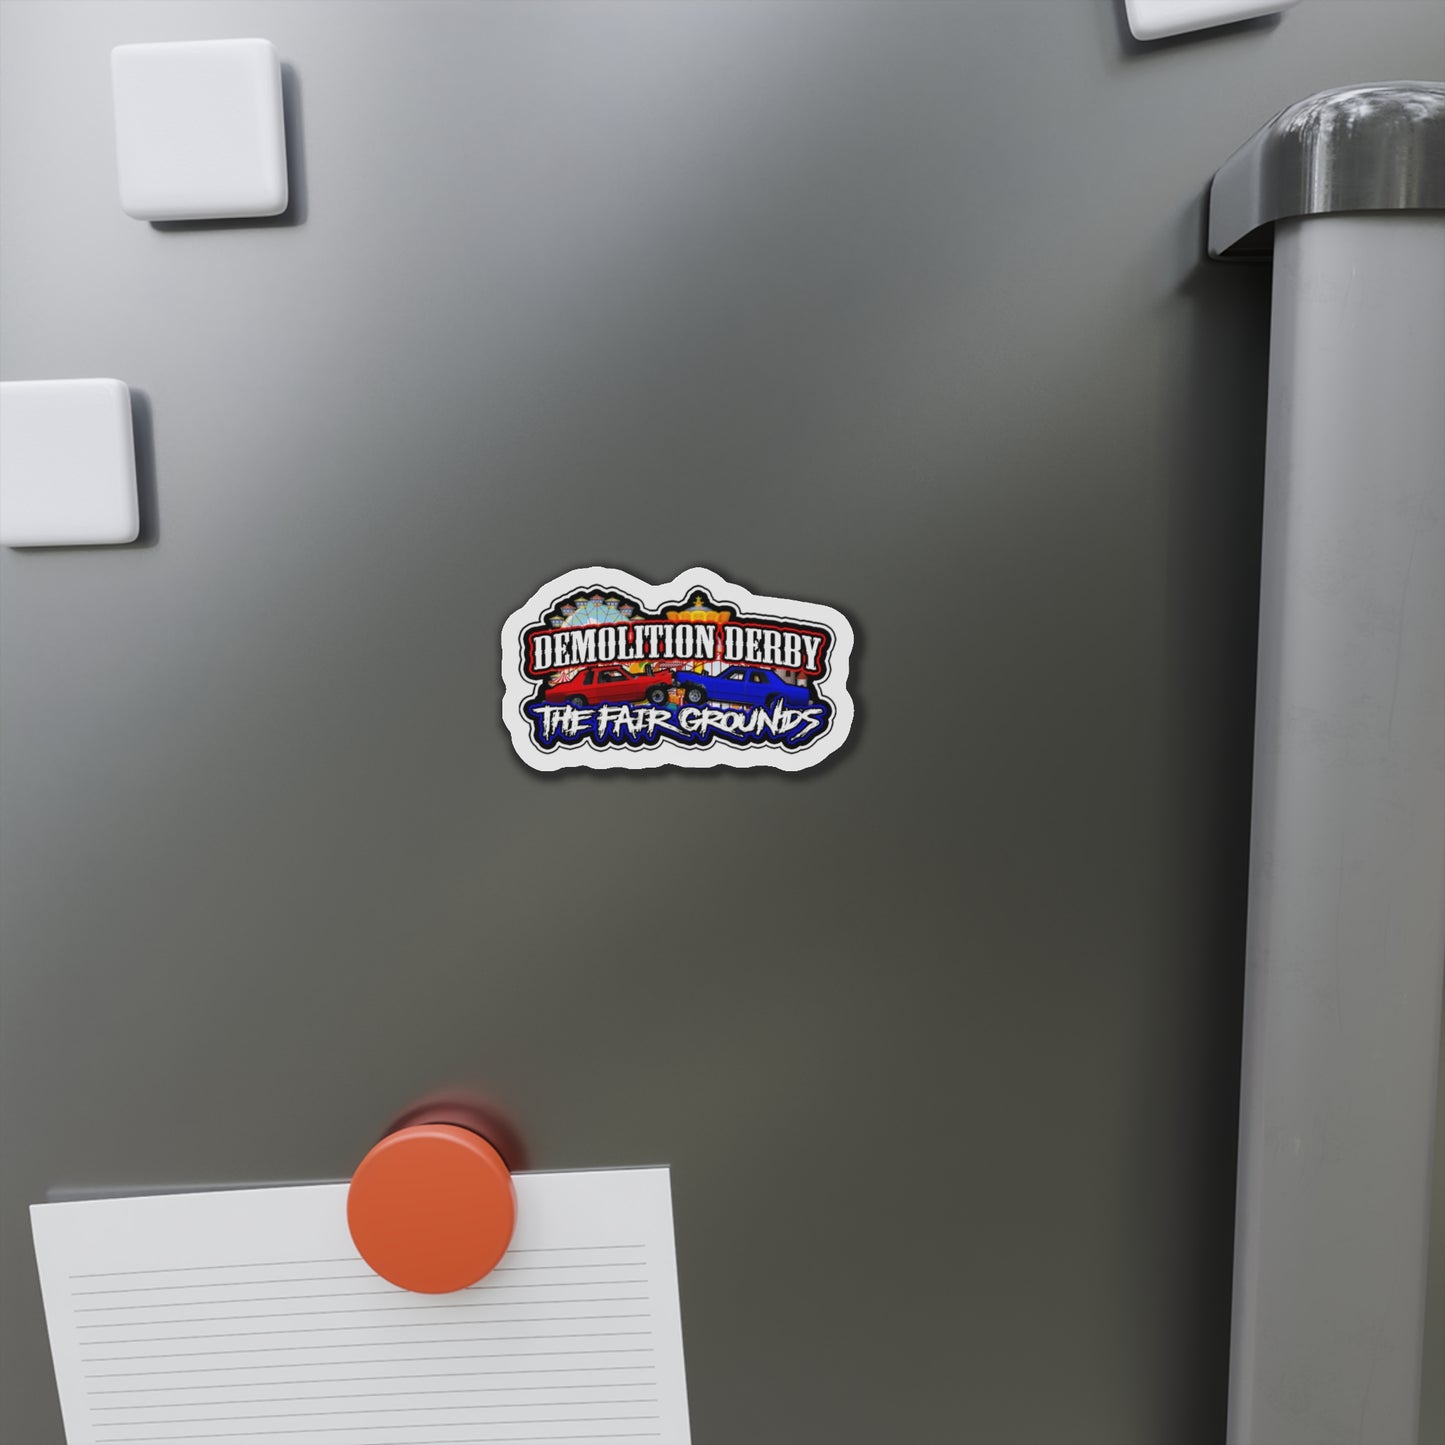 Die-Cut Magnets with FairGrounds Logo